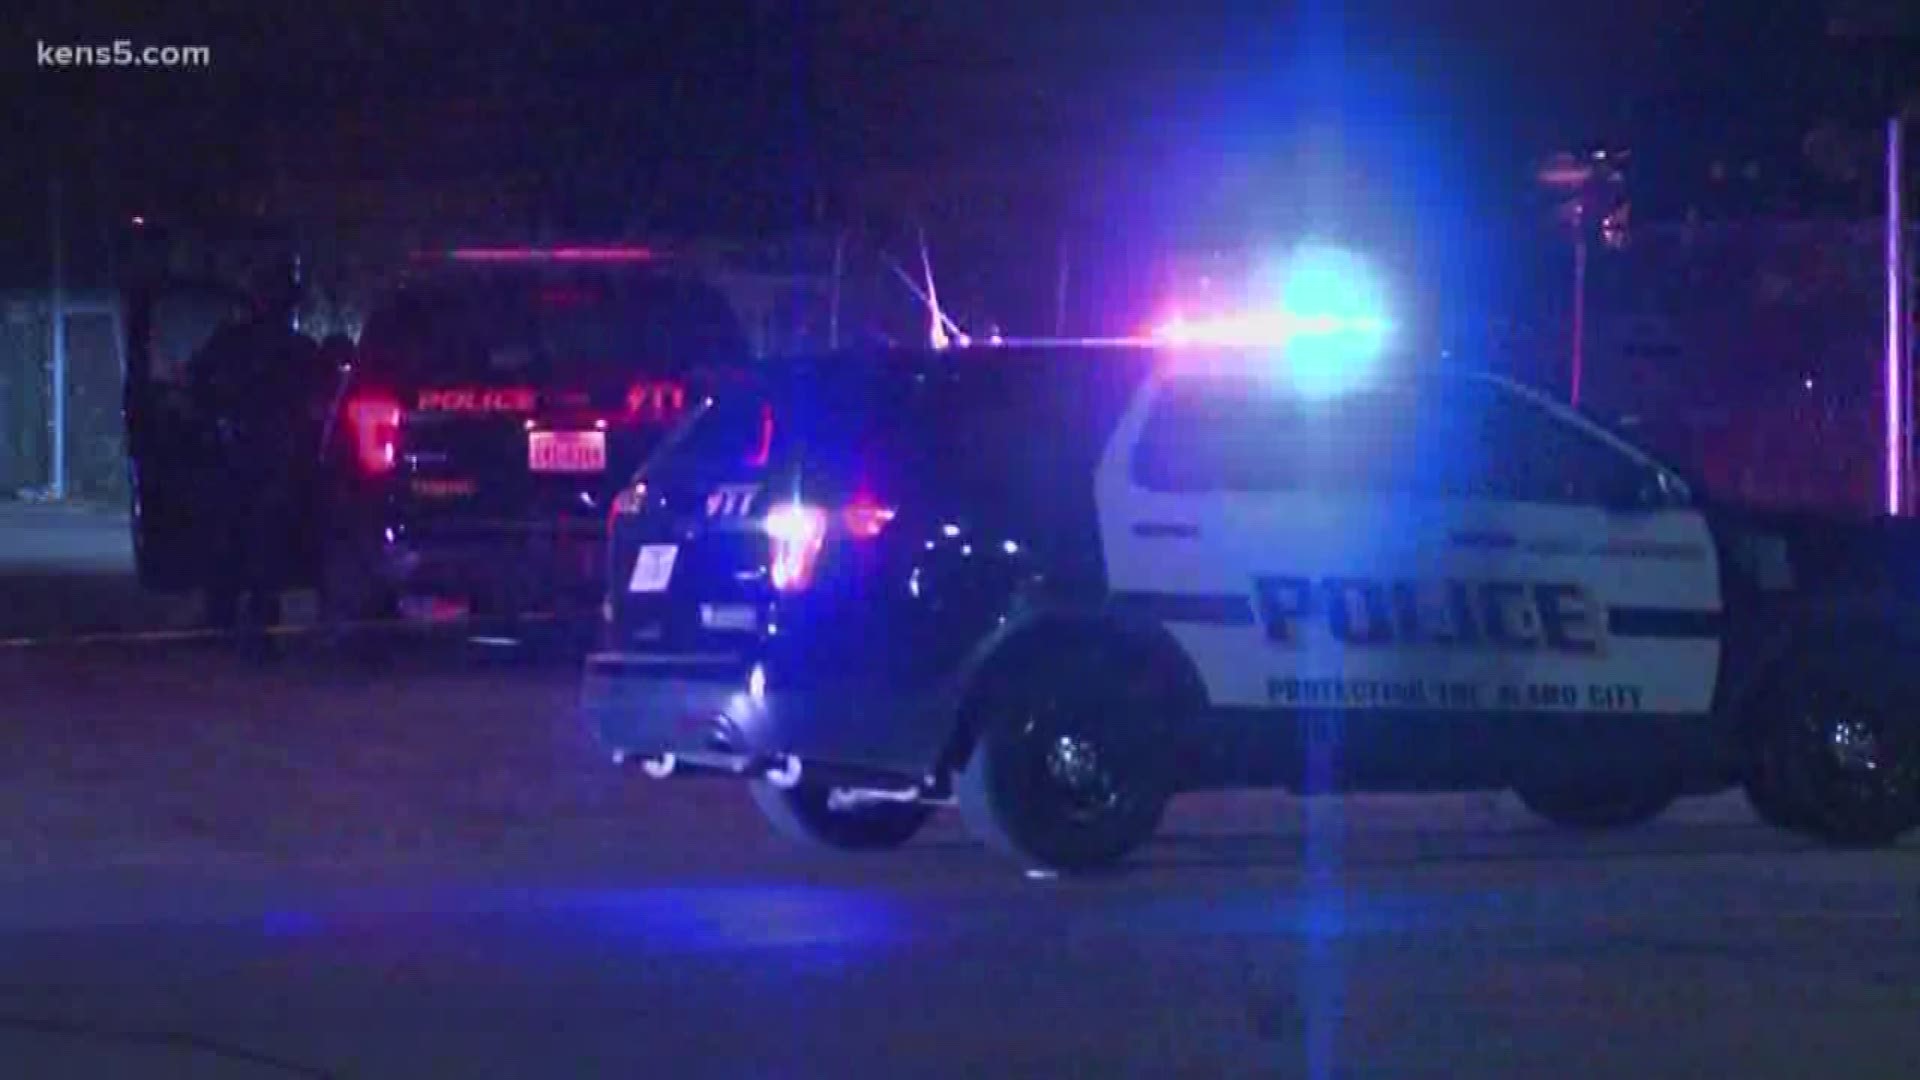 Police said a group of boys were leaving a party on Vera Cruz near Frio Street when several shots were fired at the SUV they were getting into, hitting a 15-year-old in the stomach.